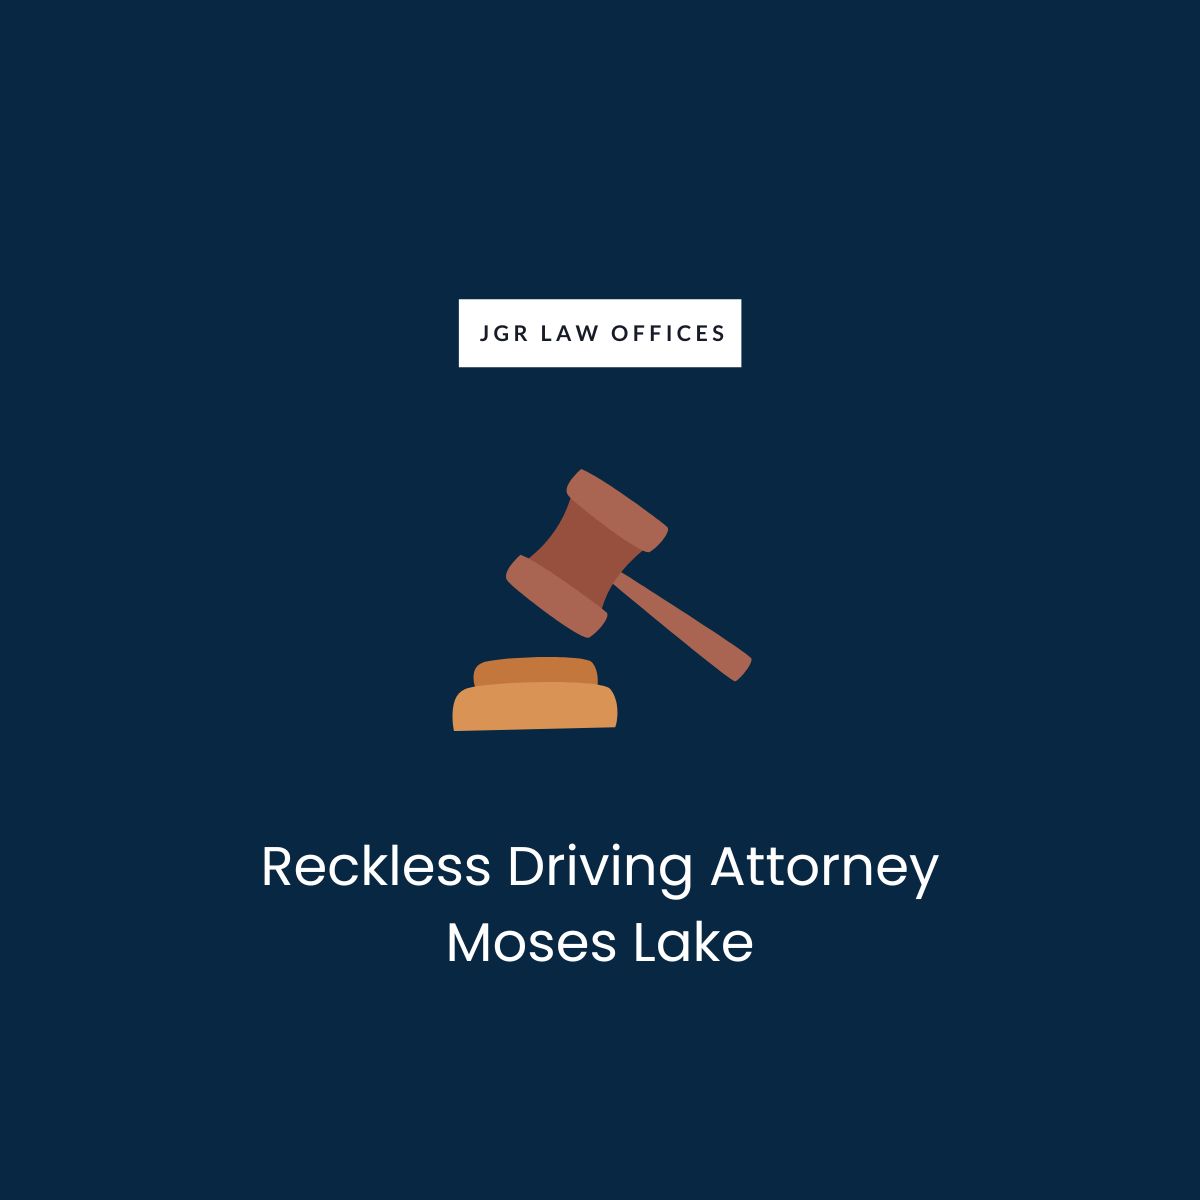 Reckless Driving Attorney Moses Lake Reckless Driving Reckless Driving